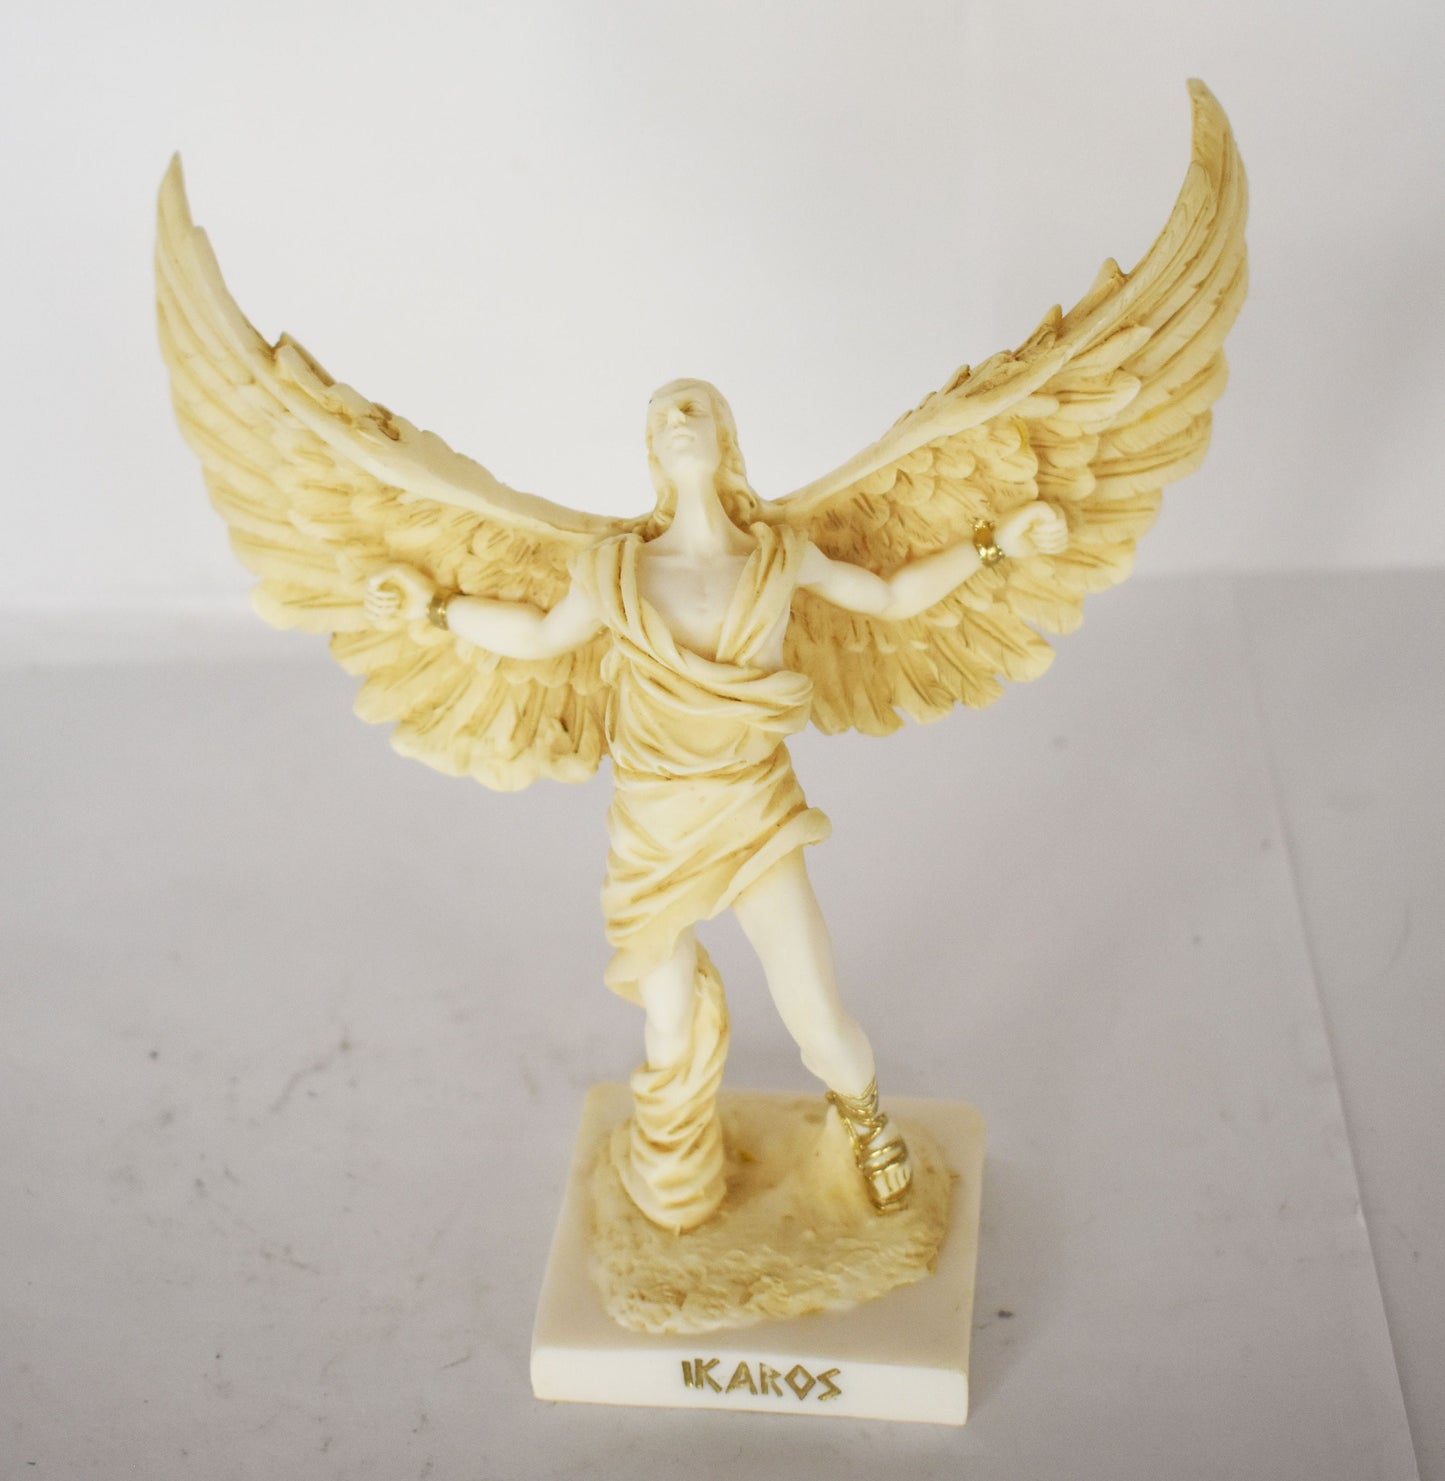 Icarus - Son of Daedalus - Escape from Crete with Wings from Wax and Drowned - Don't Fly Too Close to the Sun - aged alabaster statue